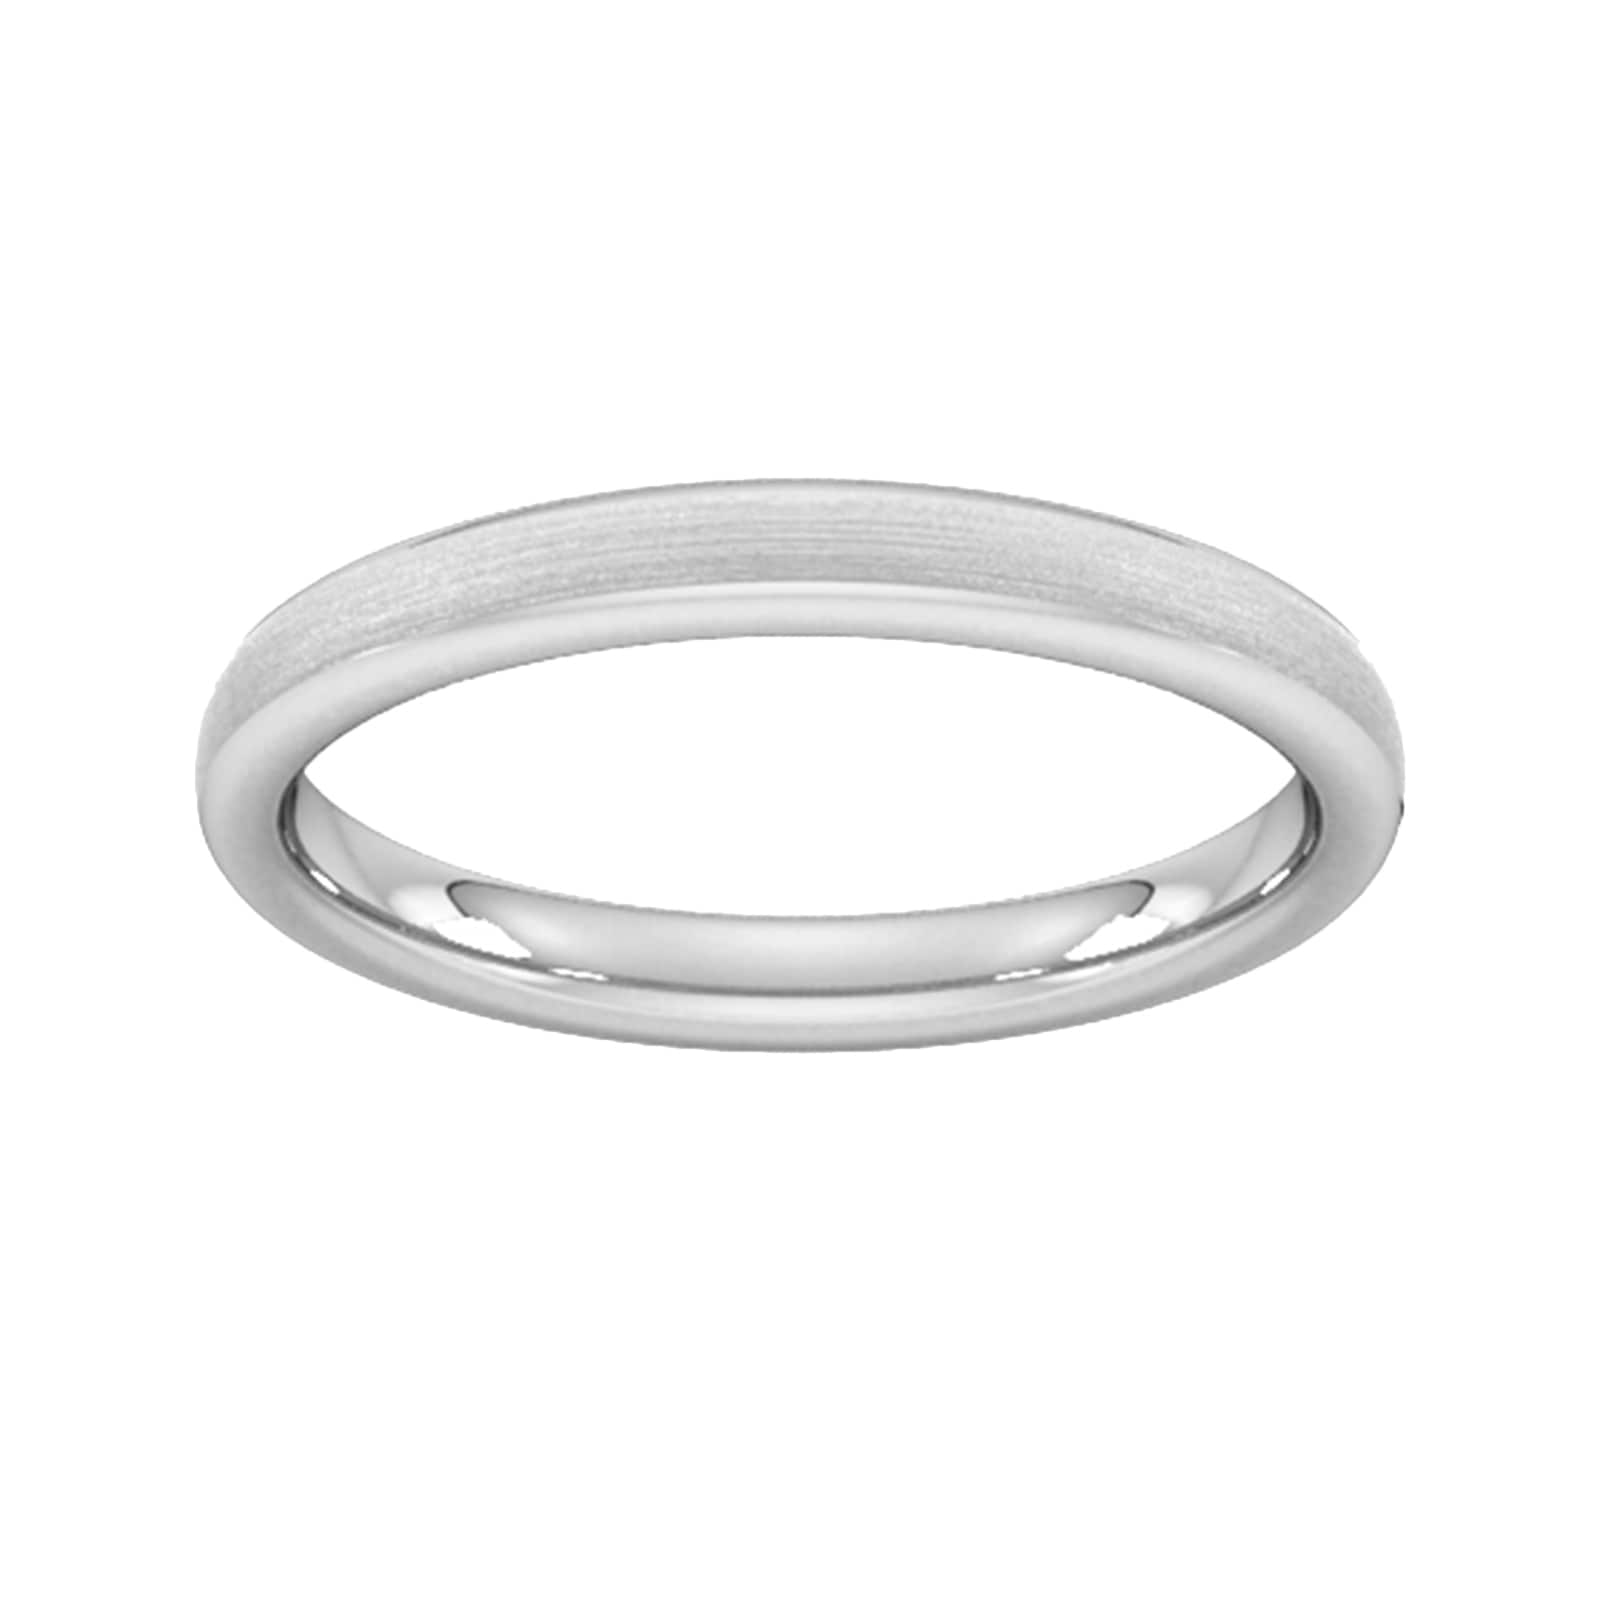 2.5mm Flat Court Heavy Matt Finished Wedding Ring In 9 Carat White Gold - Ring Size Z